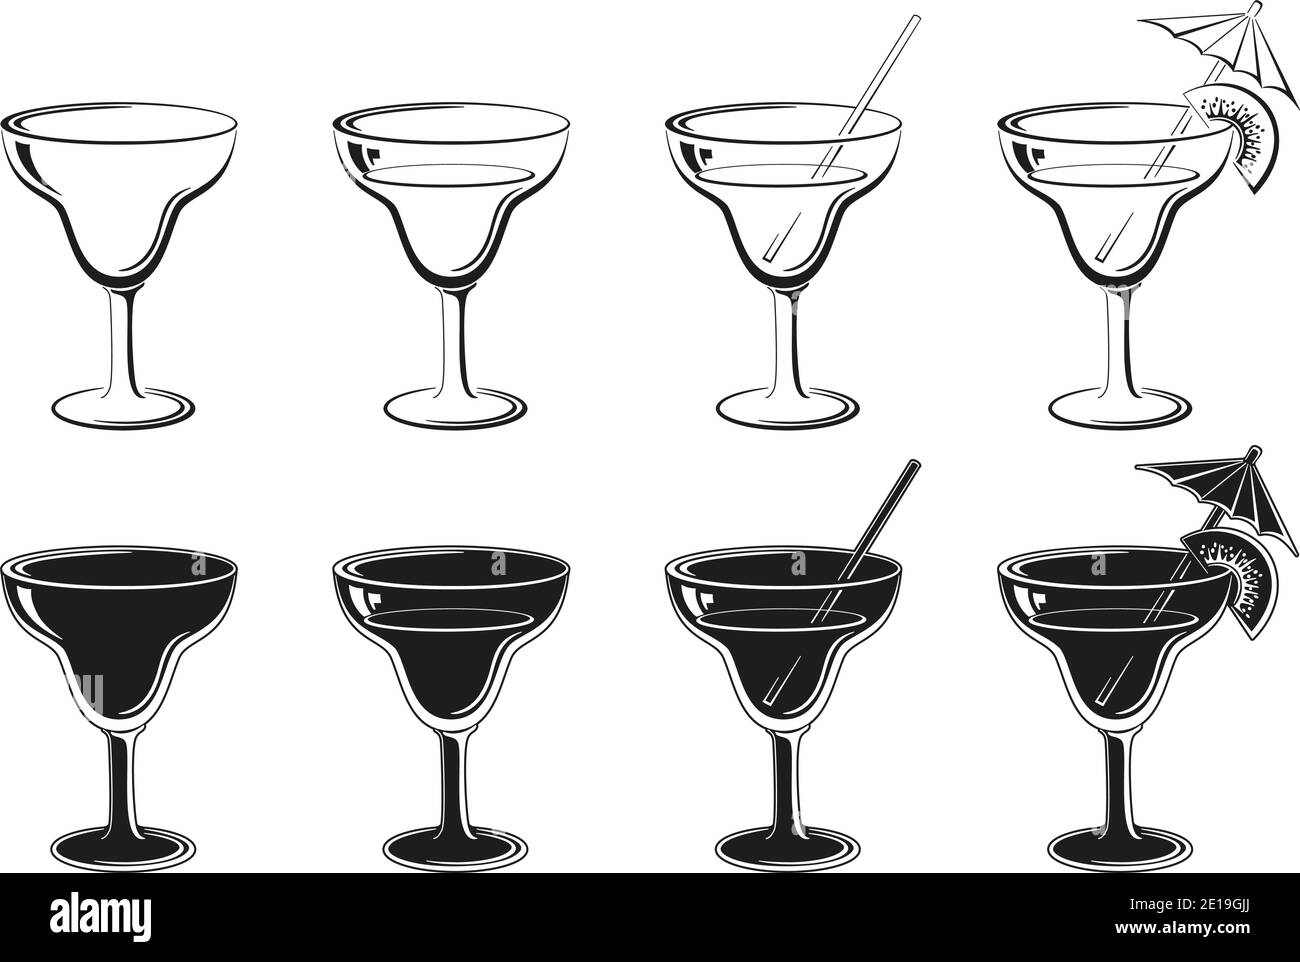 Glasses Set, Empty, with Drink, Kiwifruit and Straw Black Contours and Silhouettes Symbolical Pictogram Isolated on White Background. Vector Stock Vector